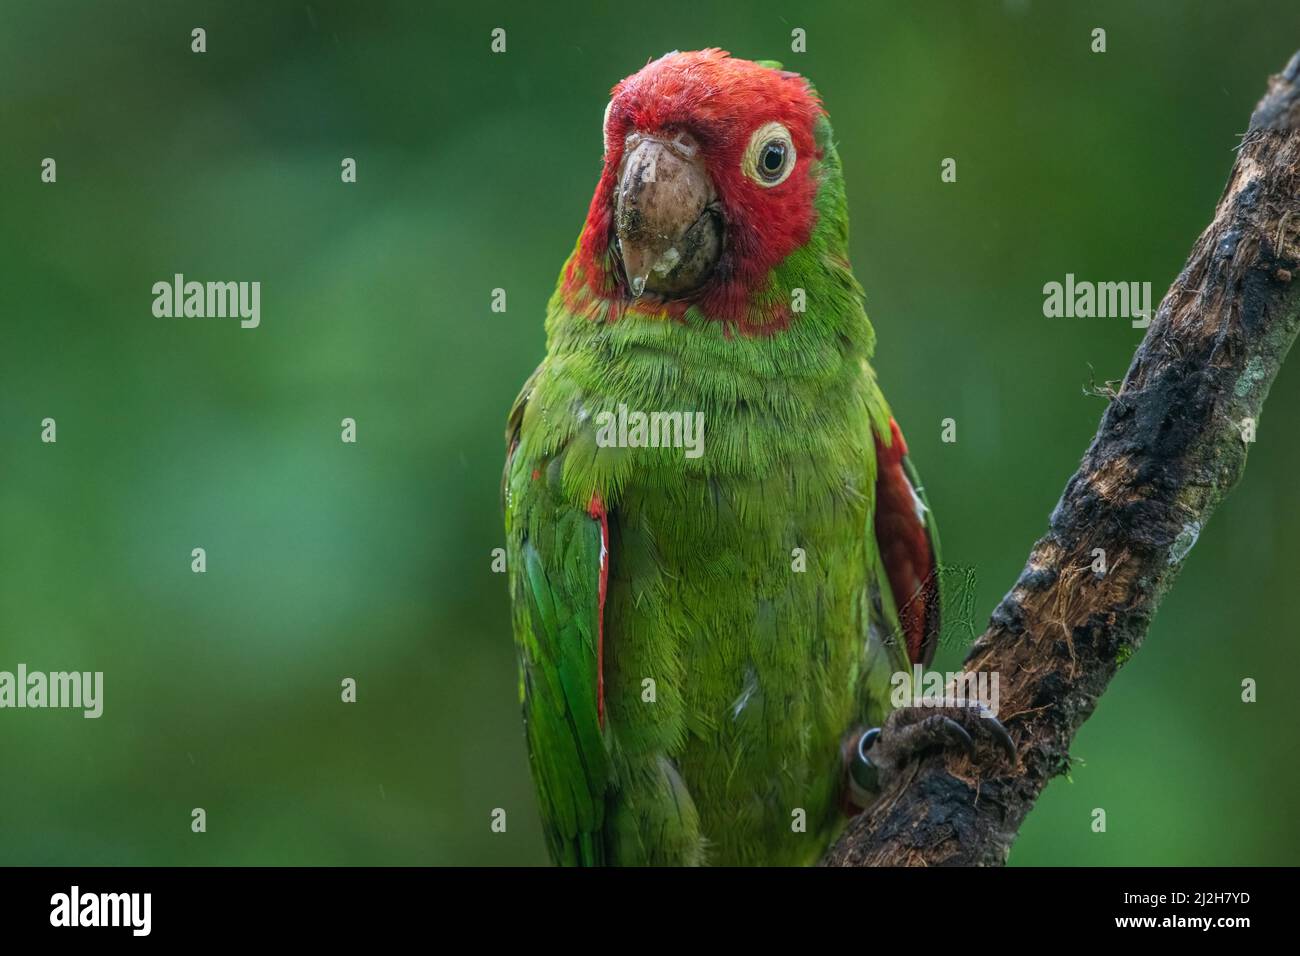 red-masked parakeet (Psittacara erythrogenys), a colorful and beautiful parrot species from the rainforests of South America. Stock Photo